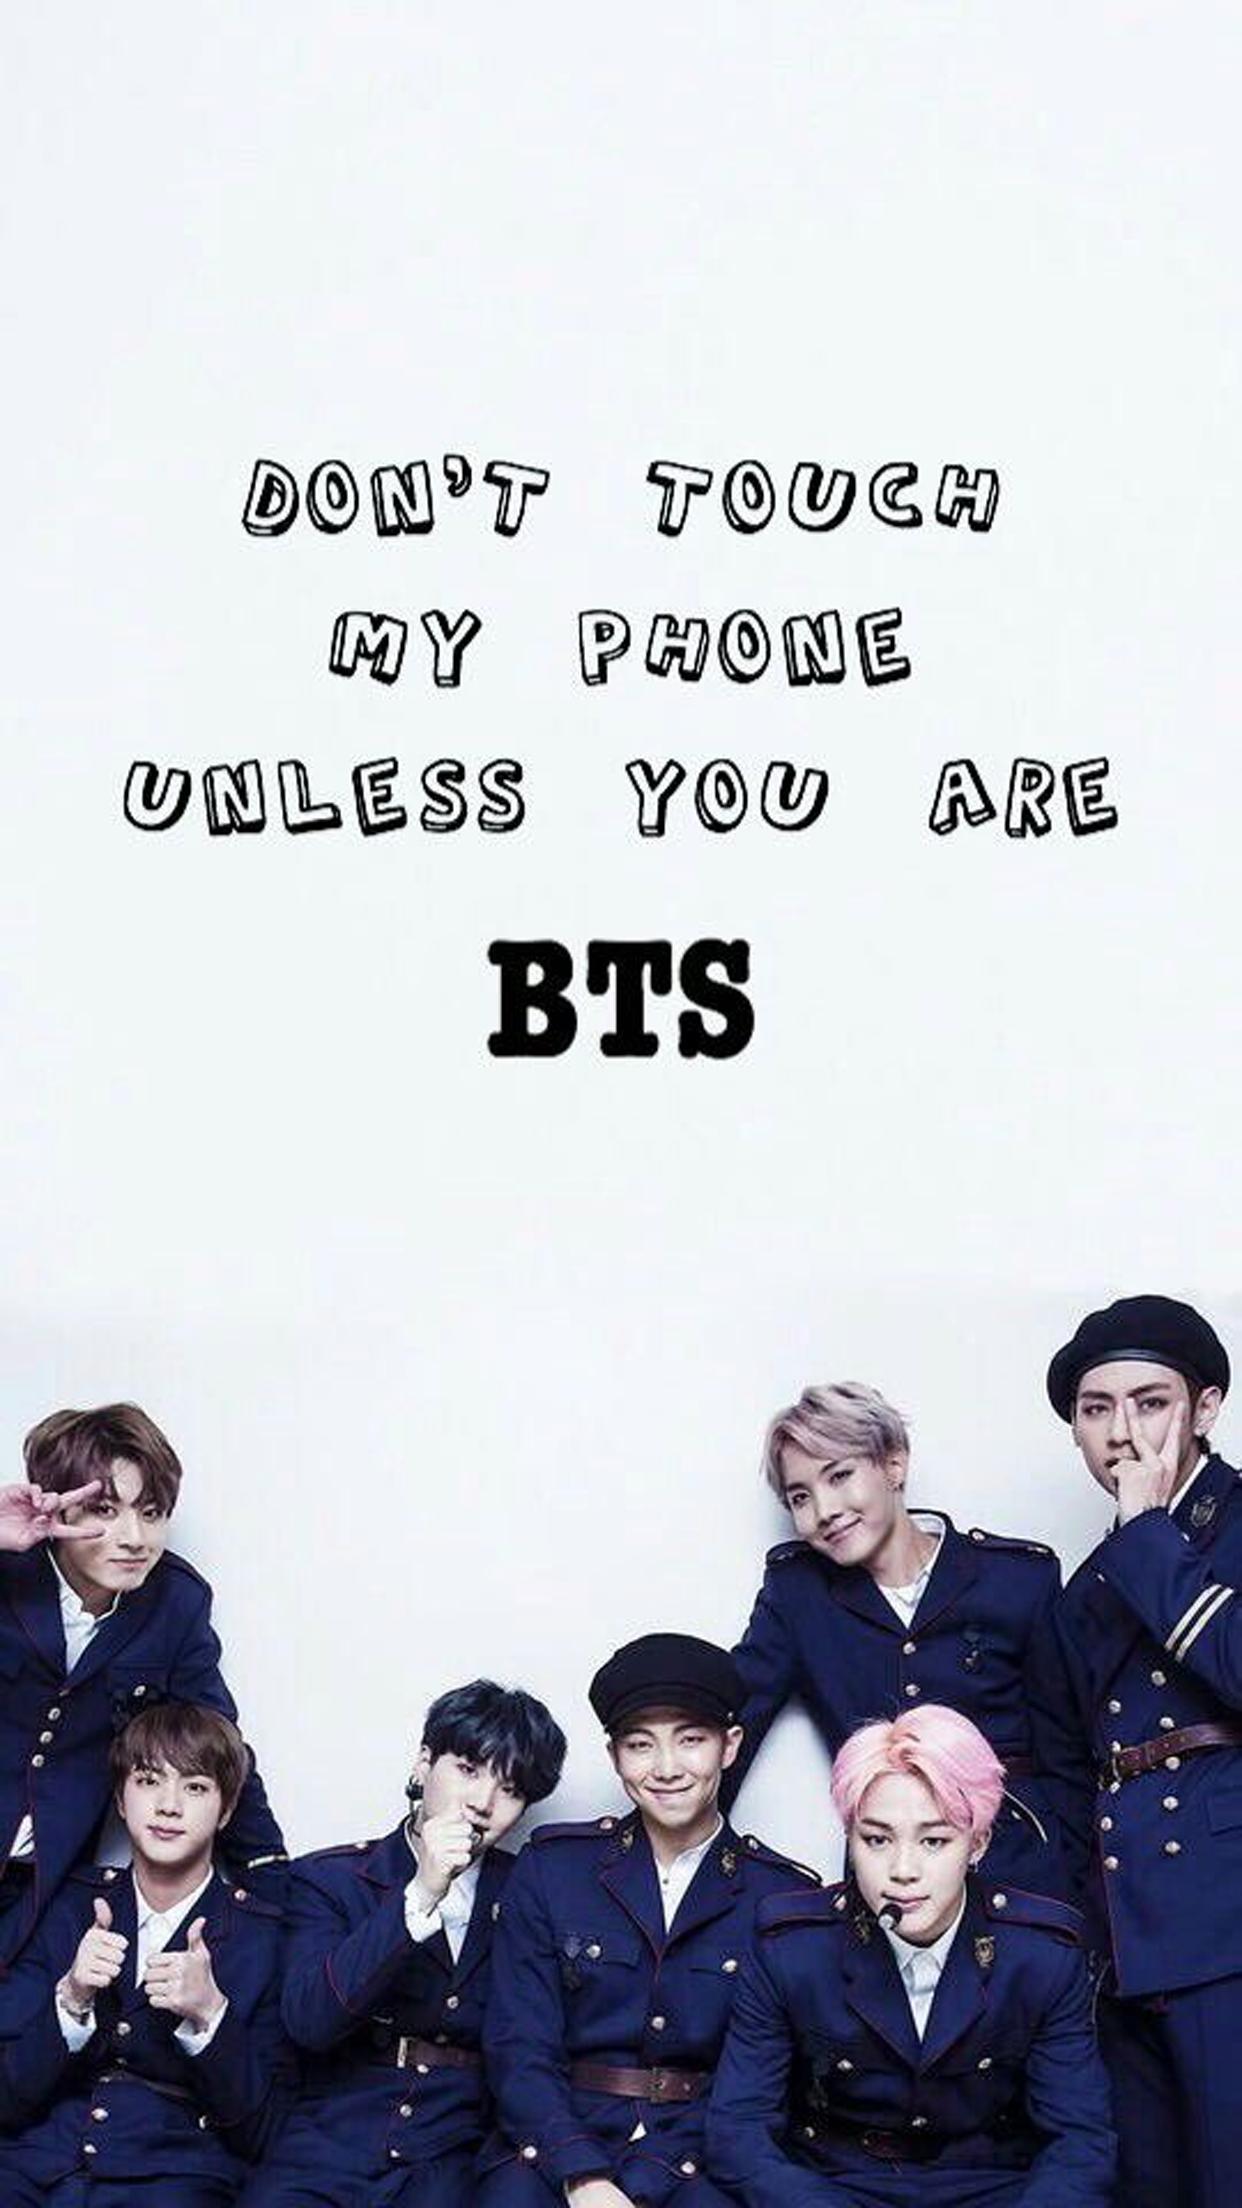 Bts Kpop Wallpapers 2018 Hd For Android Apk Download